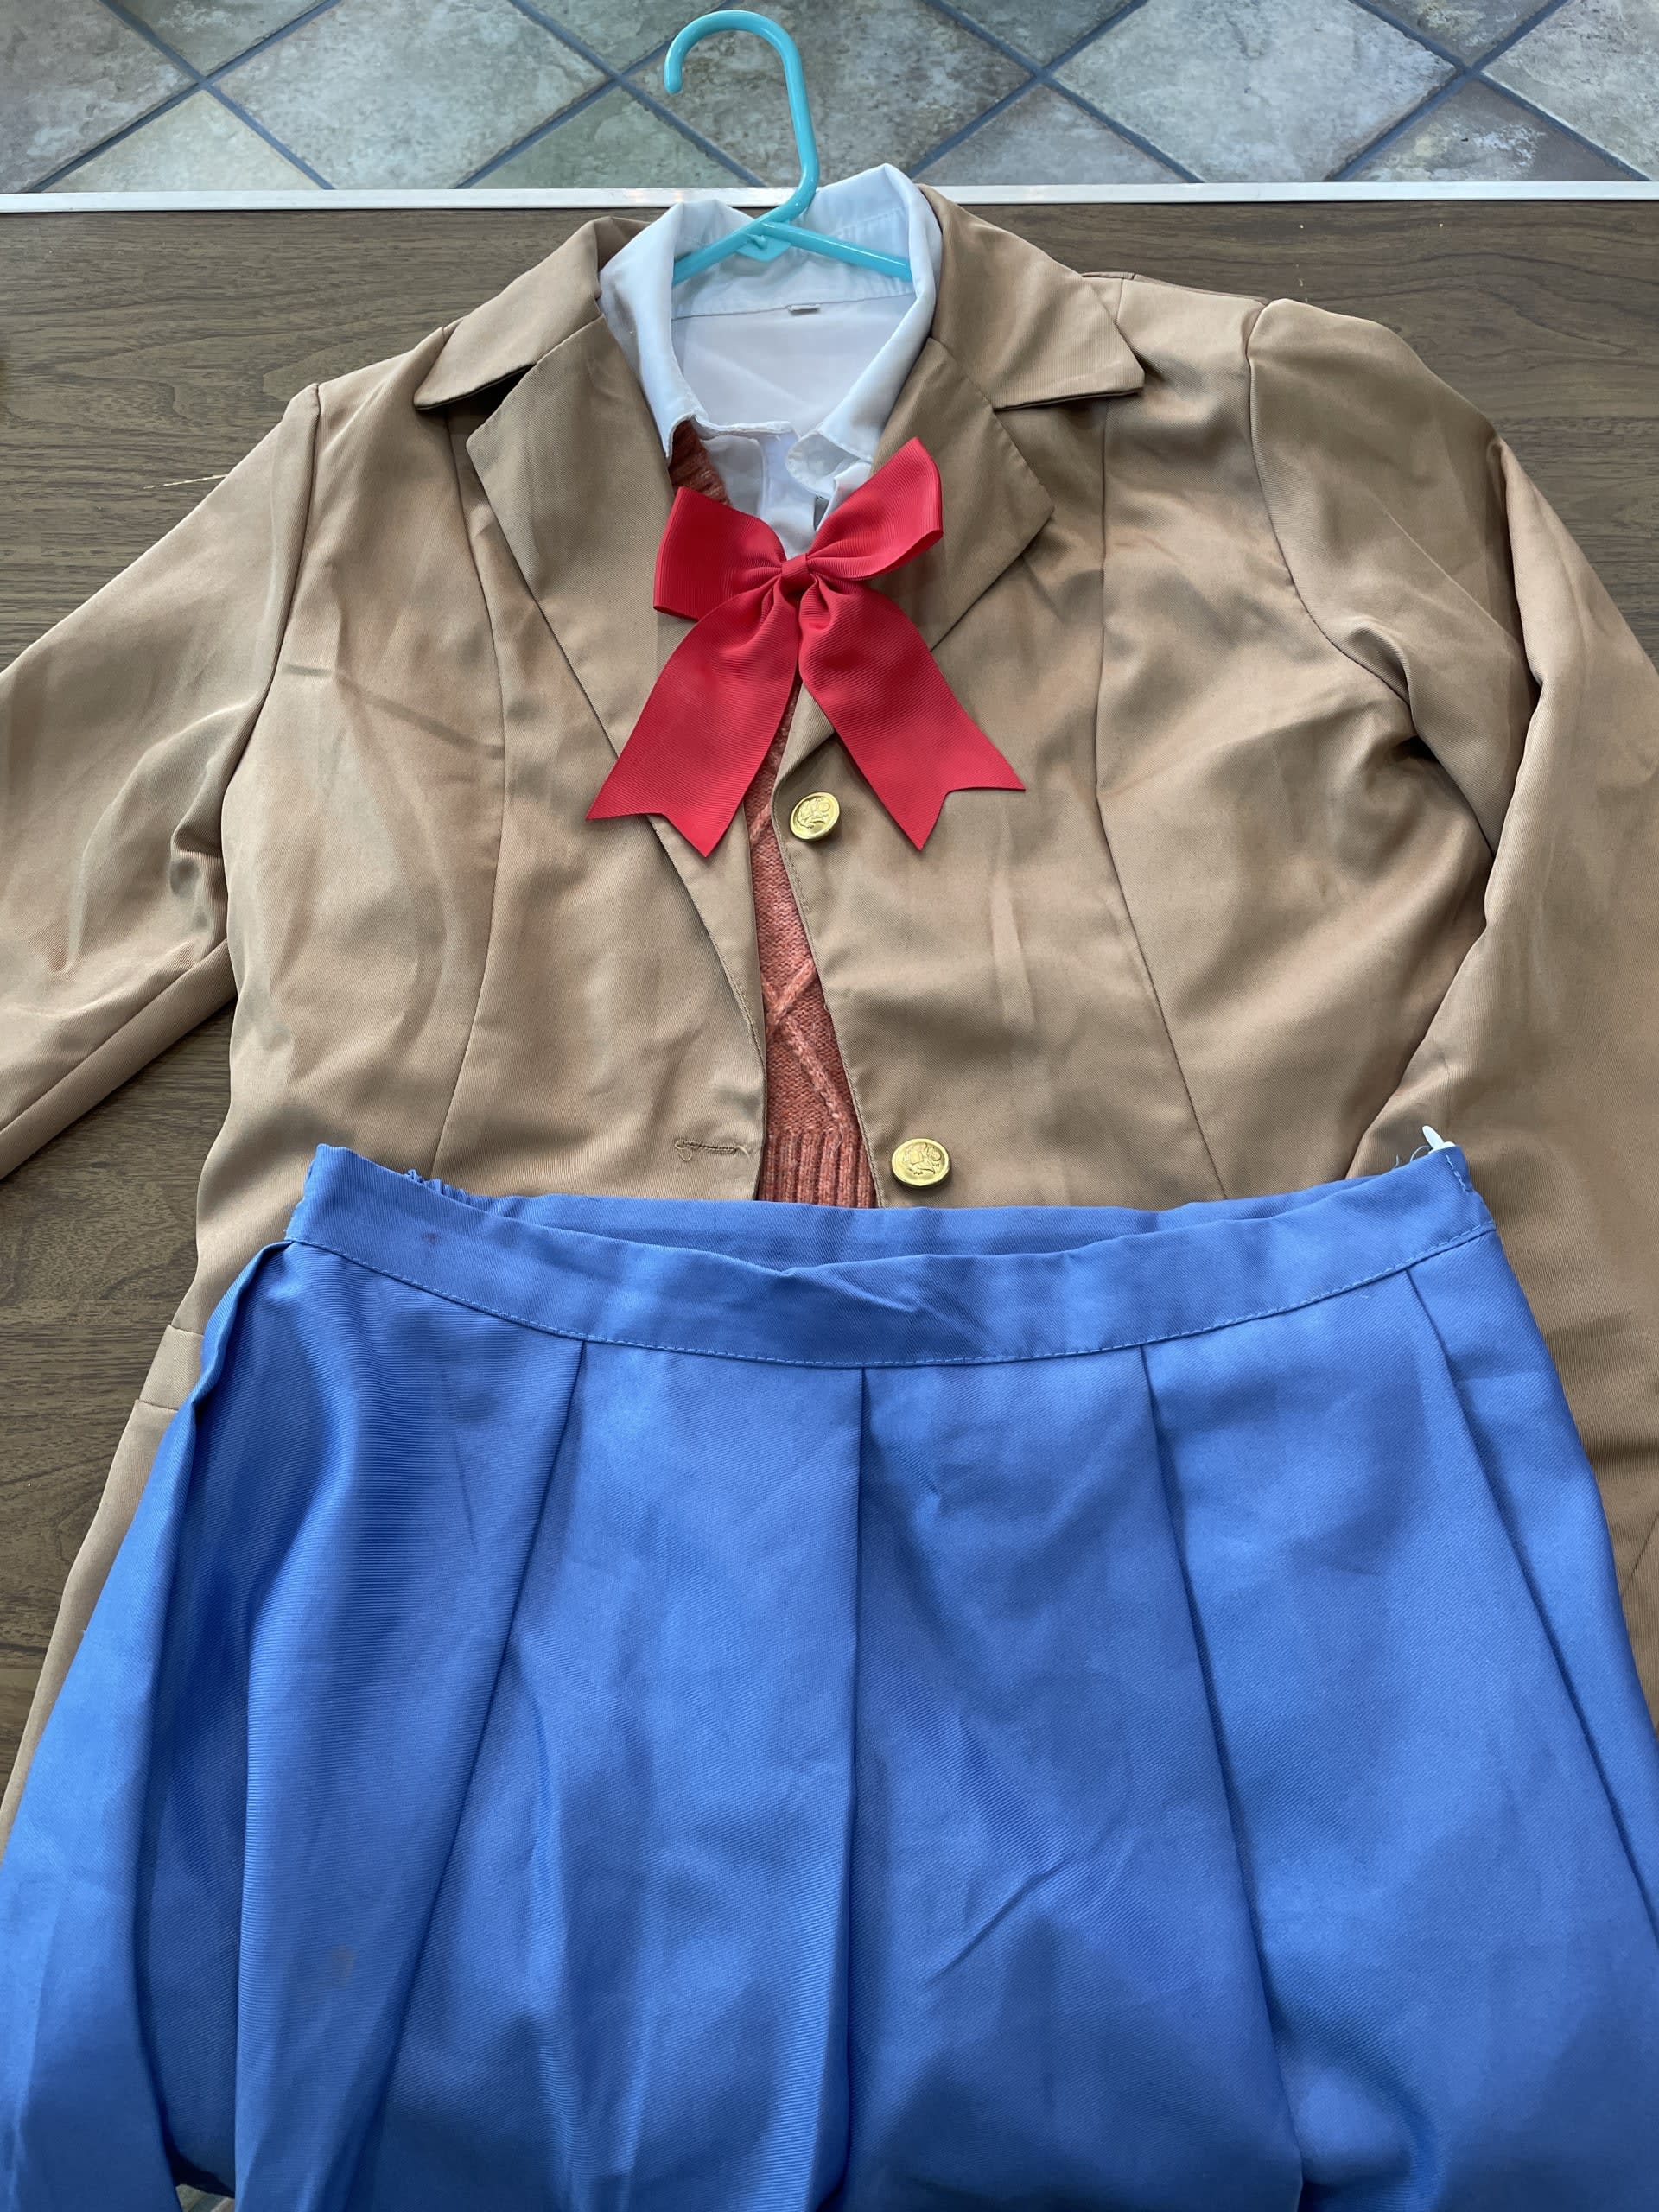 an3m1a-full-ddlc-uniform-comes-with